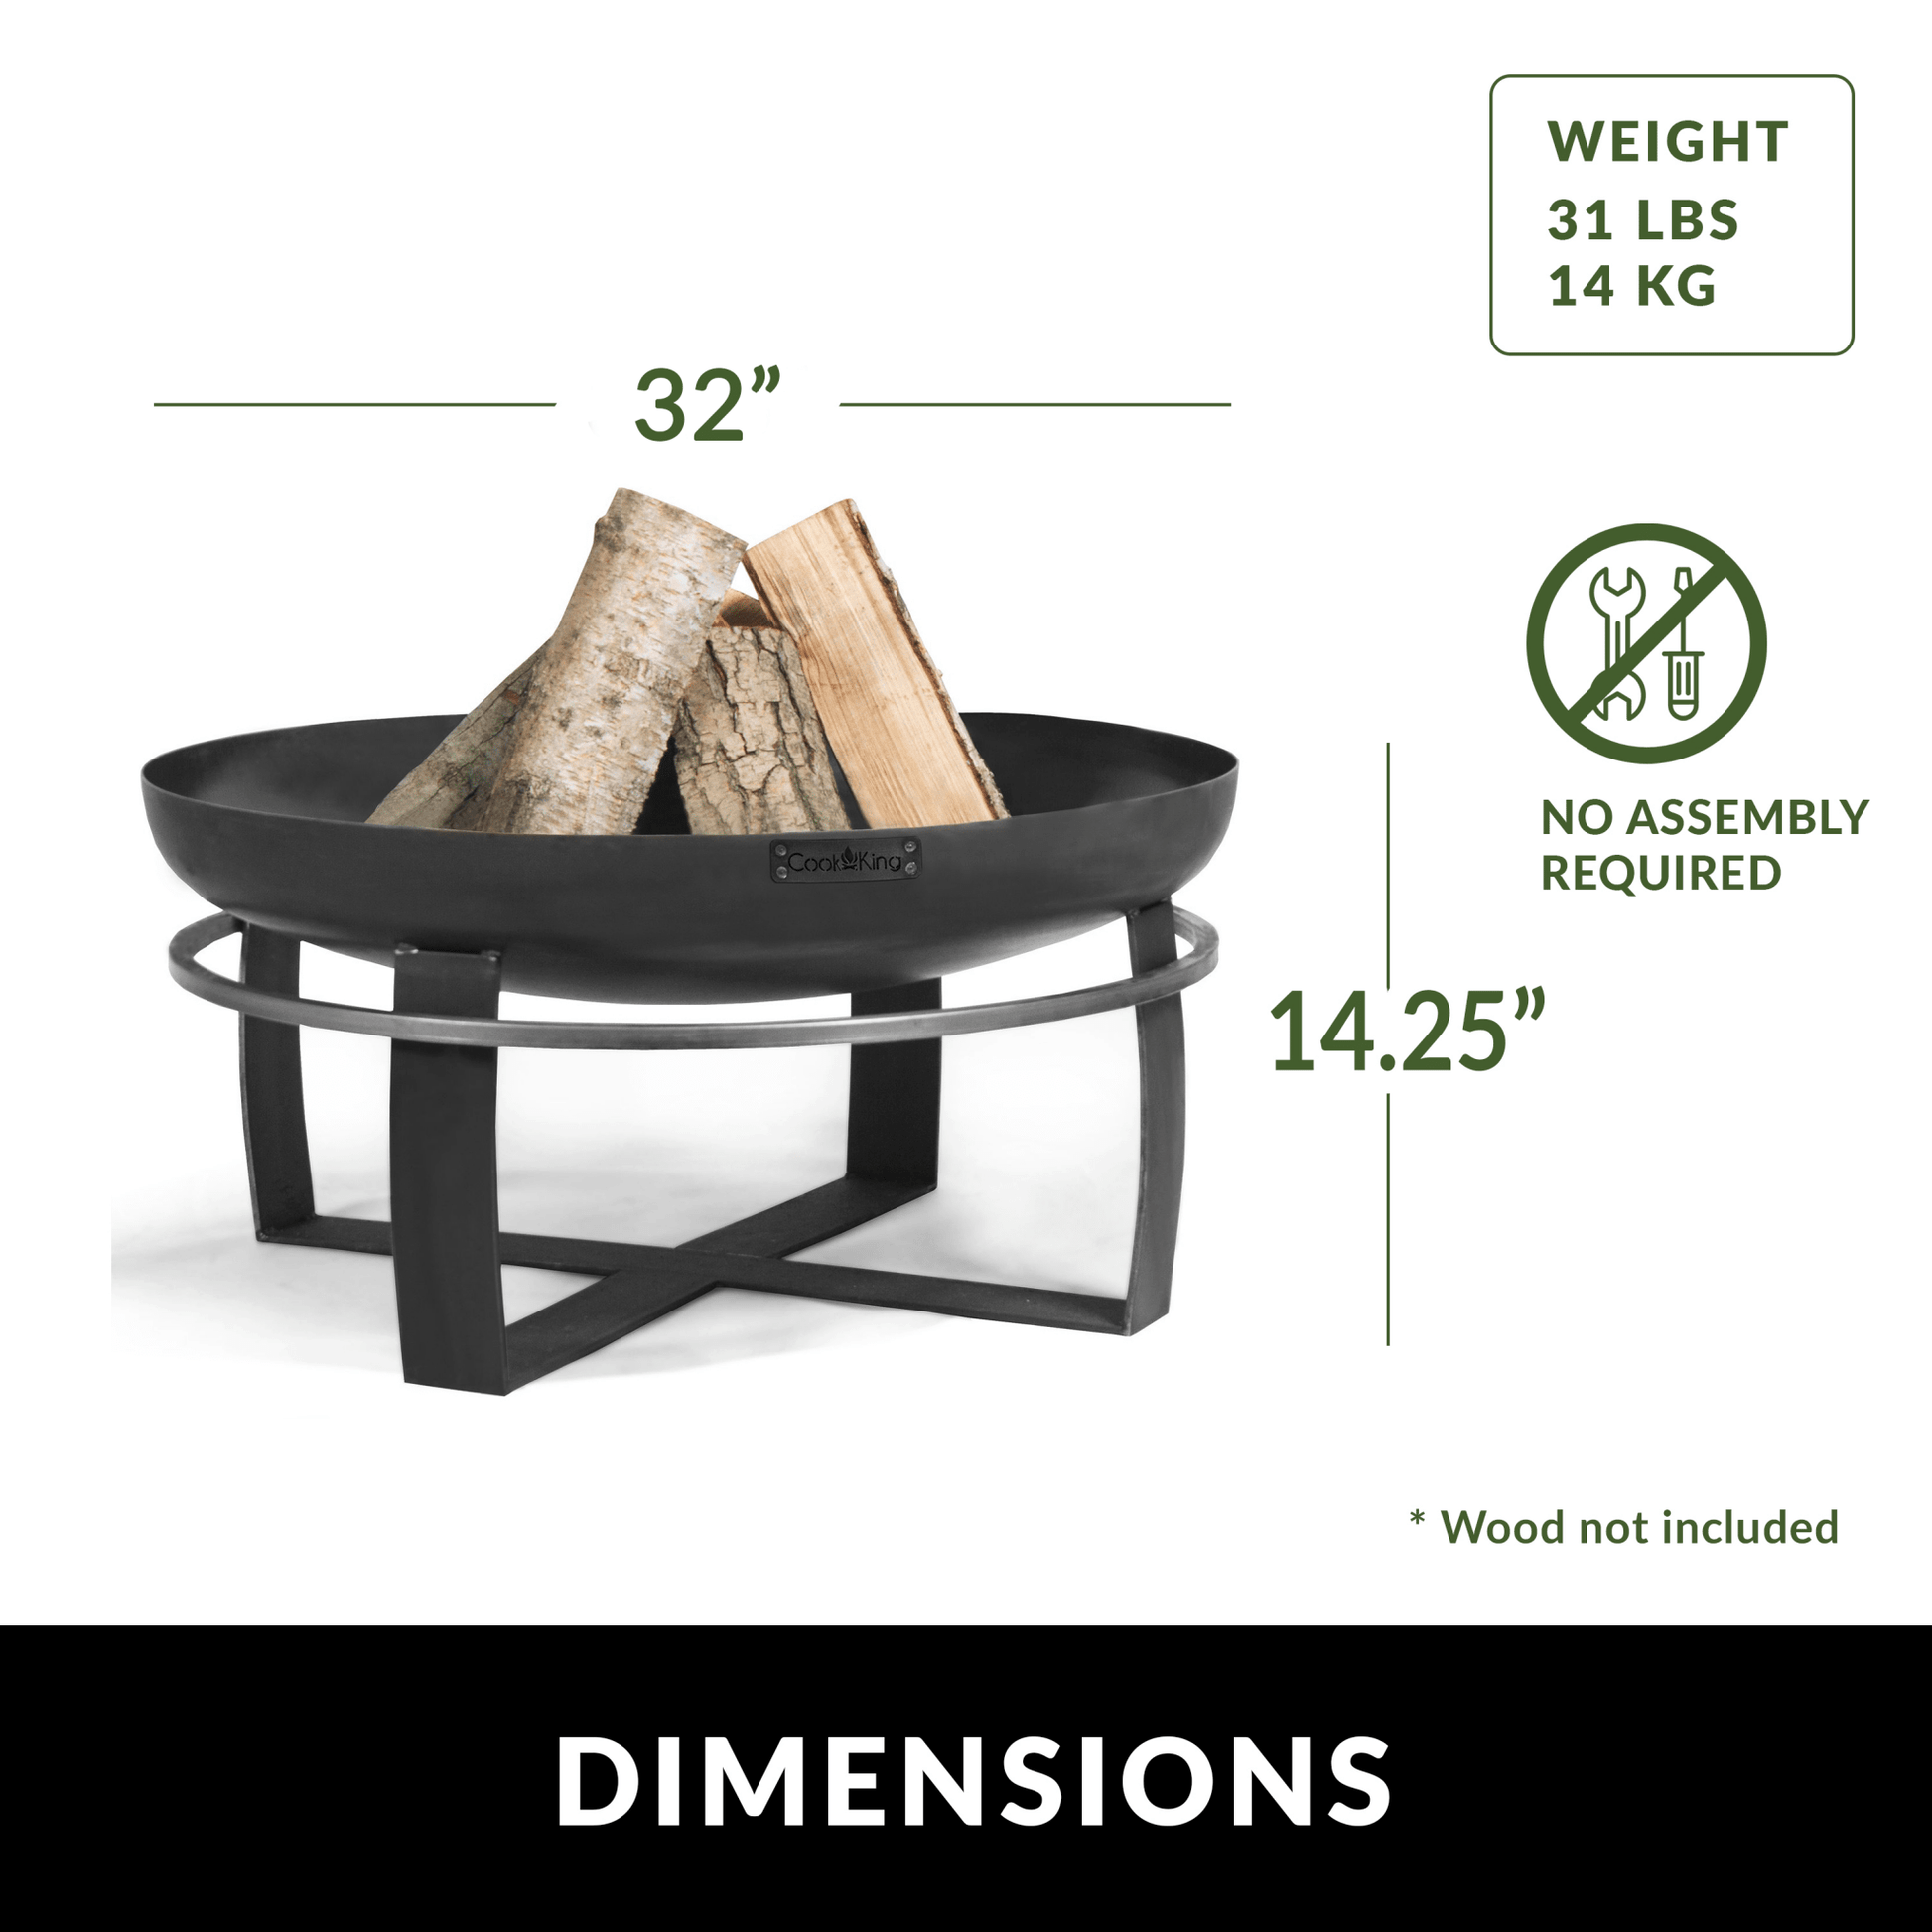 Viking 32" Fire Pit with Cover Lid - Good Directions